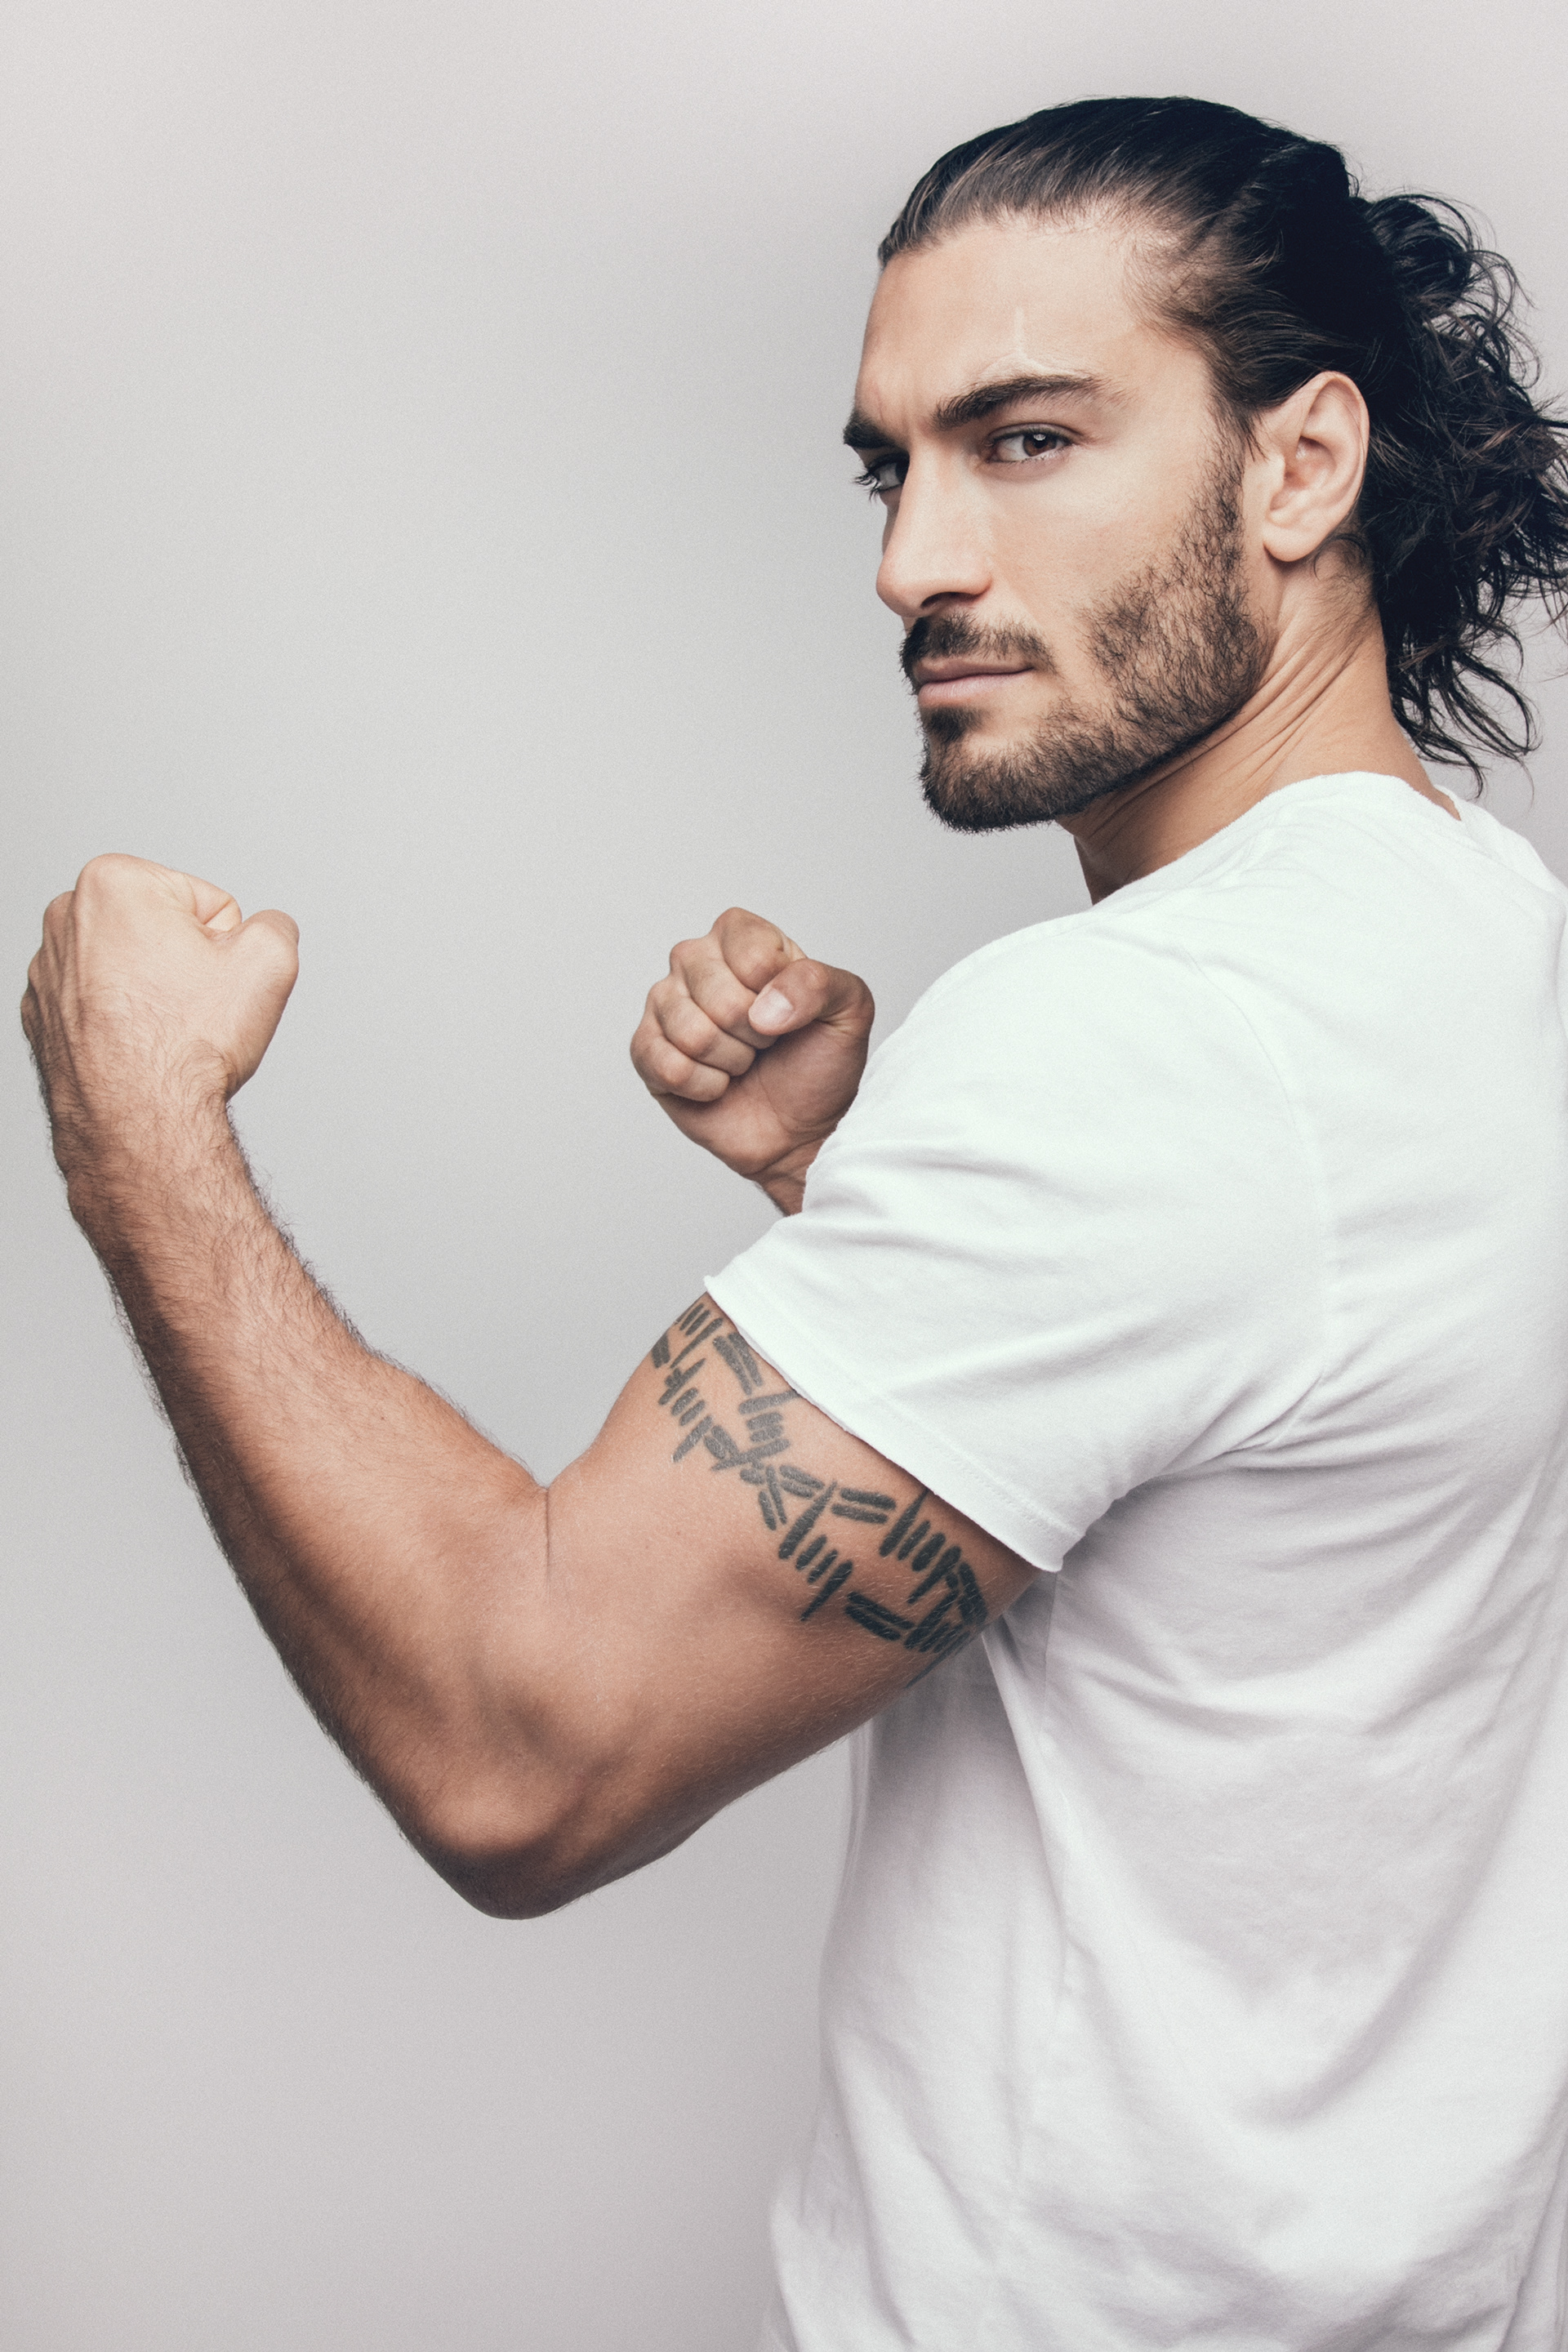 Elias Theodorou, MMA Champion The Mane Event™ Continues to Make History - Fighting The Stigma of Athlete’s & Cannabis Use In Las Vegas, Nevada